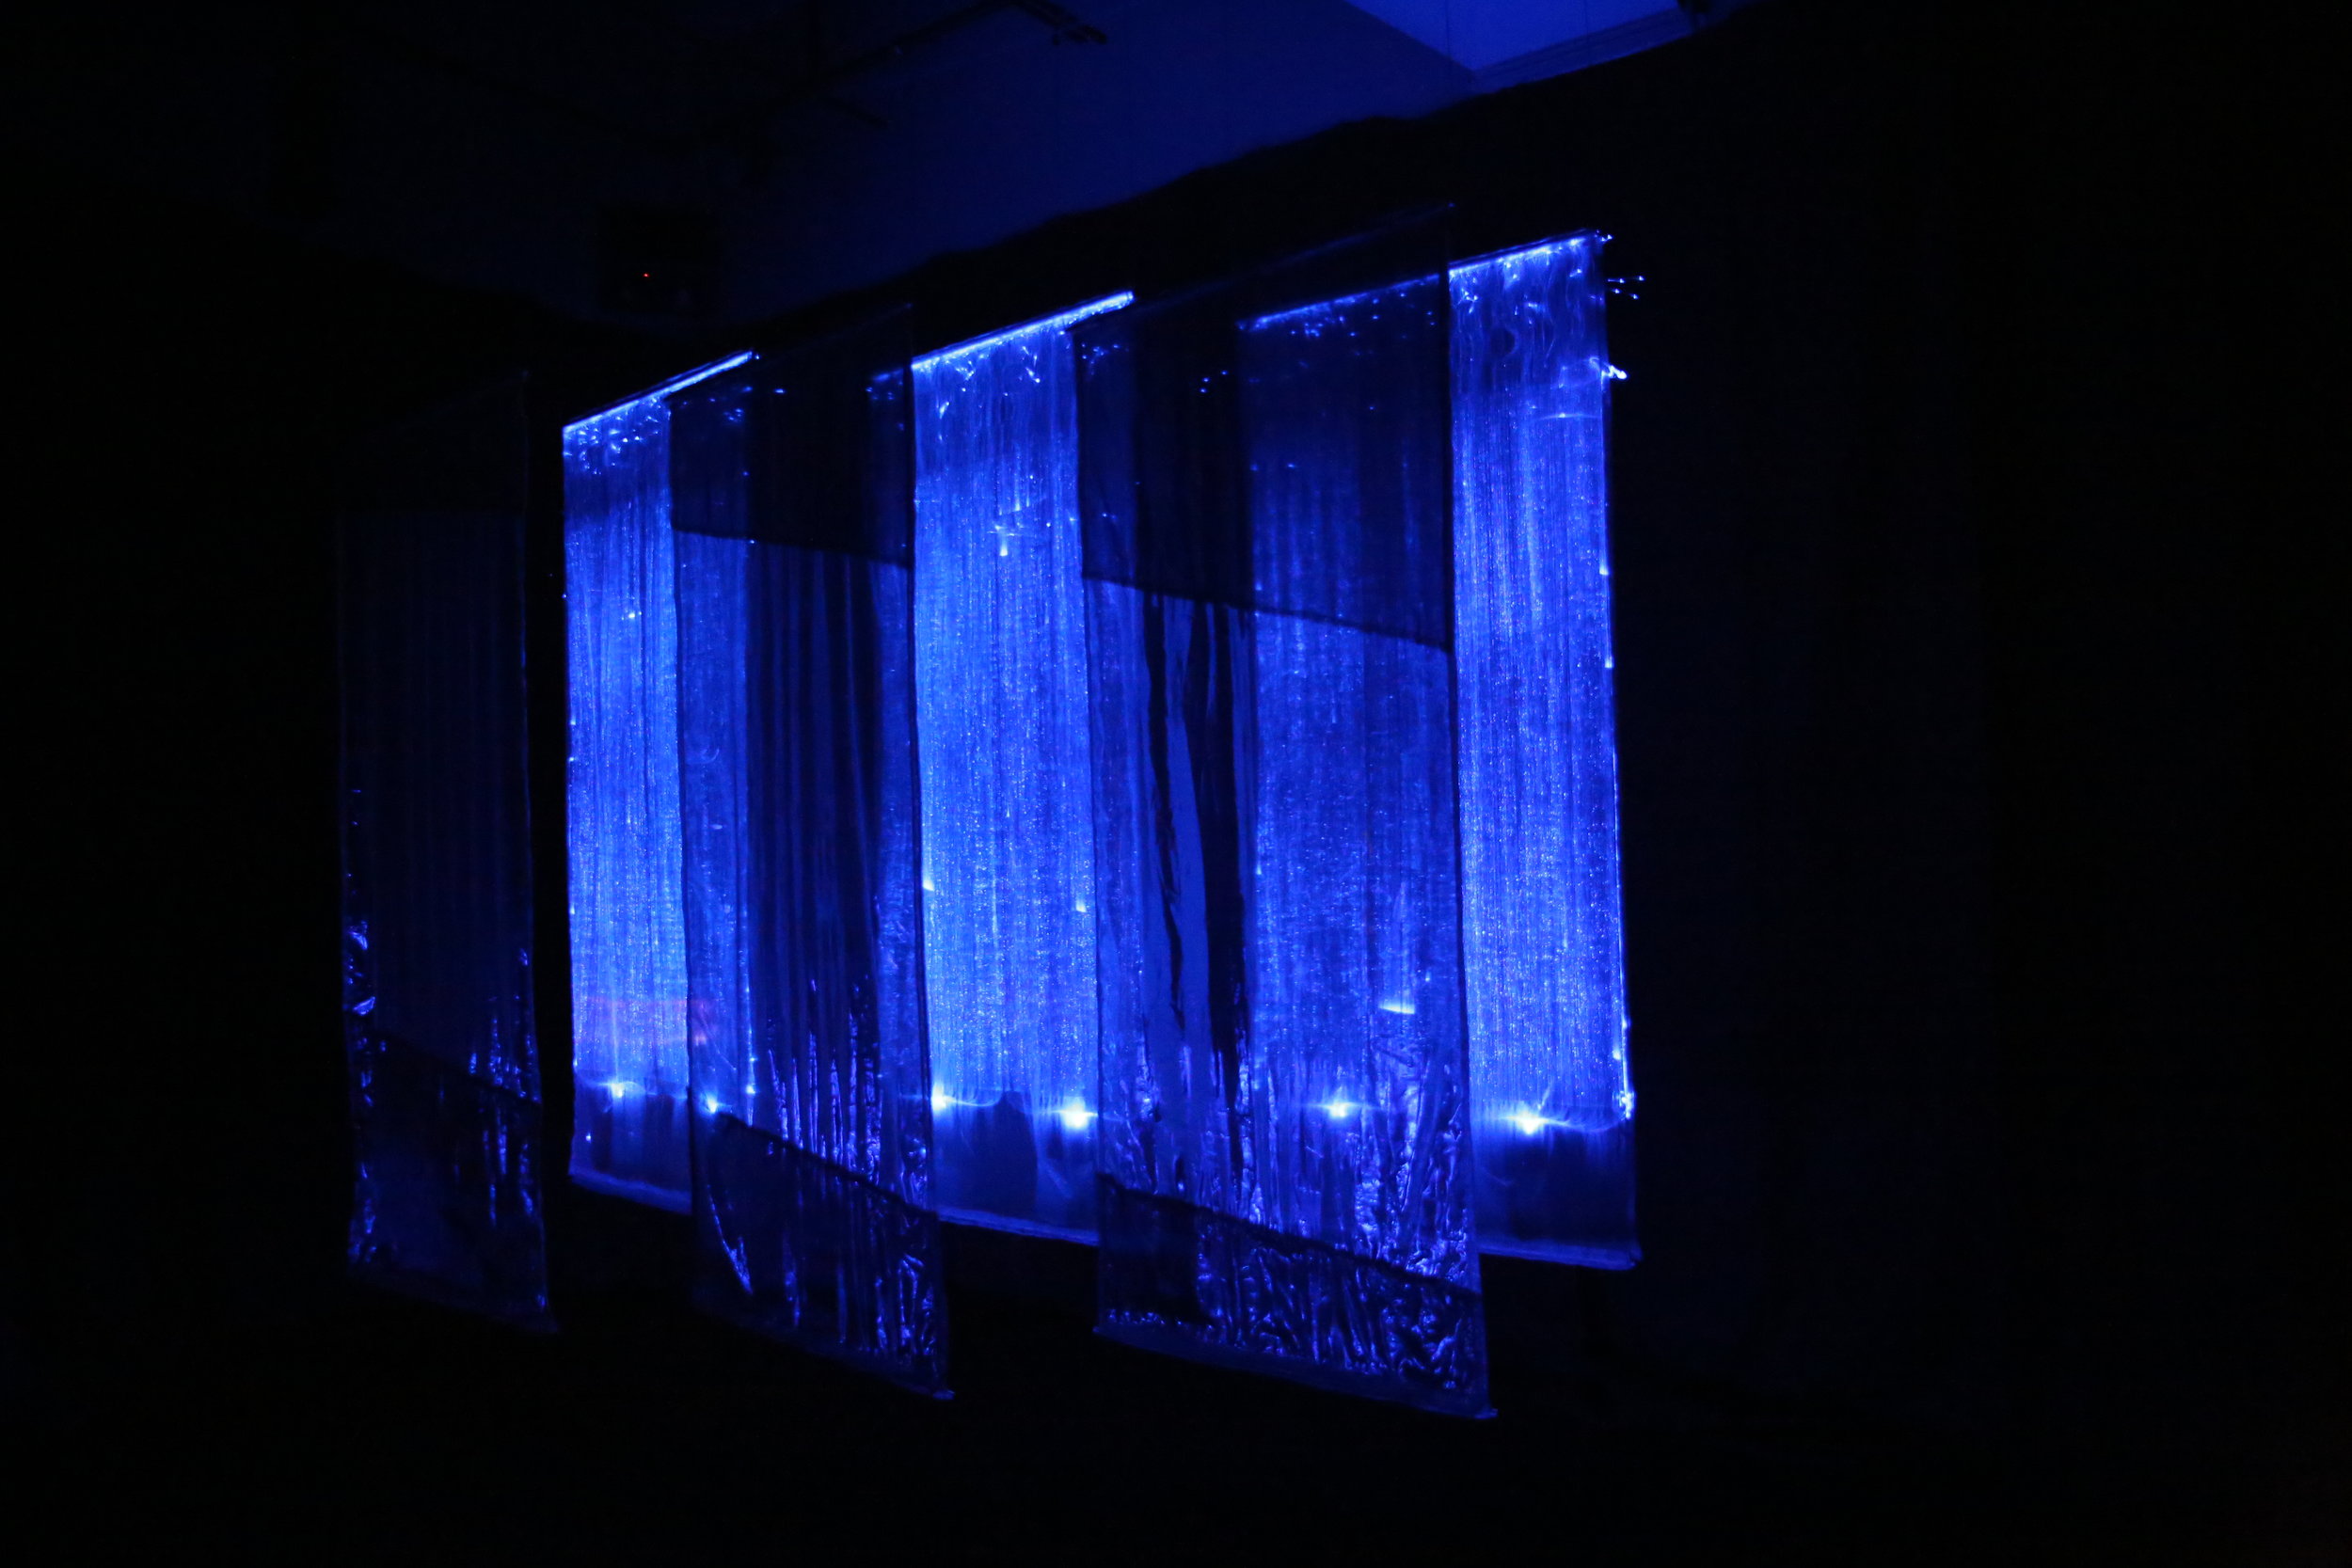   Mikawa , 2017, installation at Jack Straw Cultural Center, Seattle. Six 8’ x 30” hanging panels -- three fiberoptic, and three reflective translucent fabric.&nbsp; Duratrans superimposed photo on light box, 30” x 24” x 6” deep.&nbsp; Shown in fully